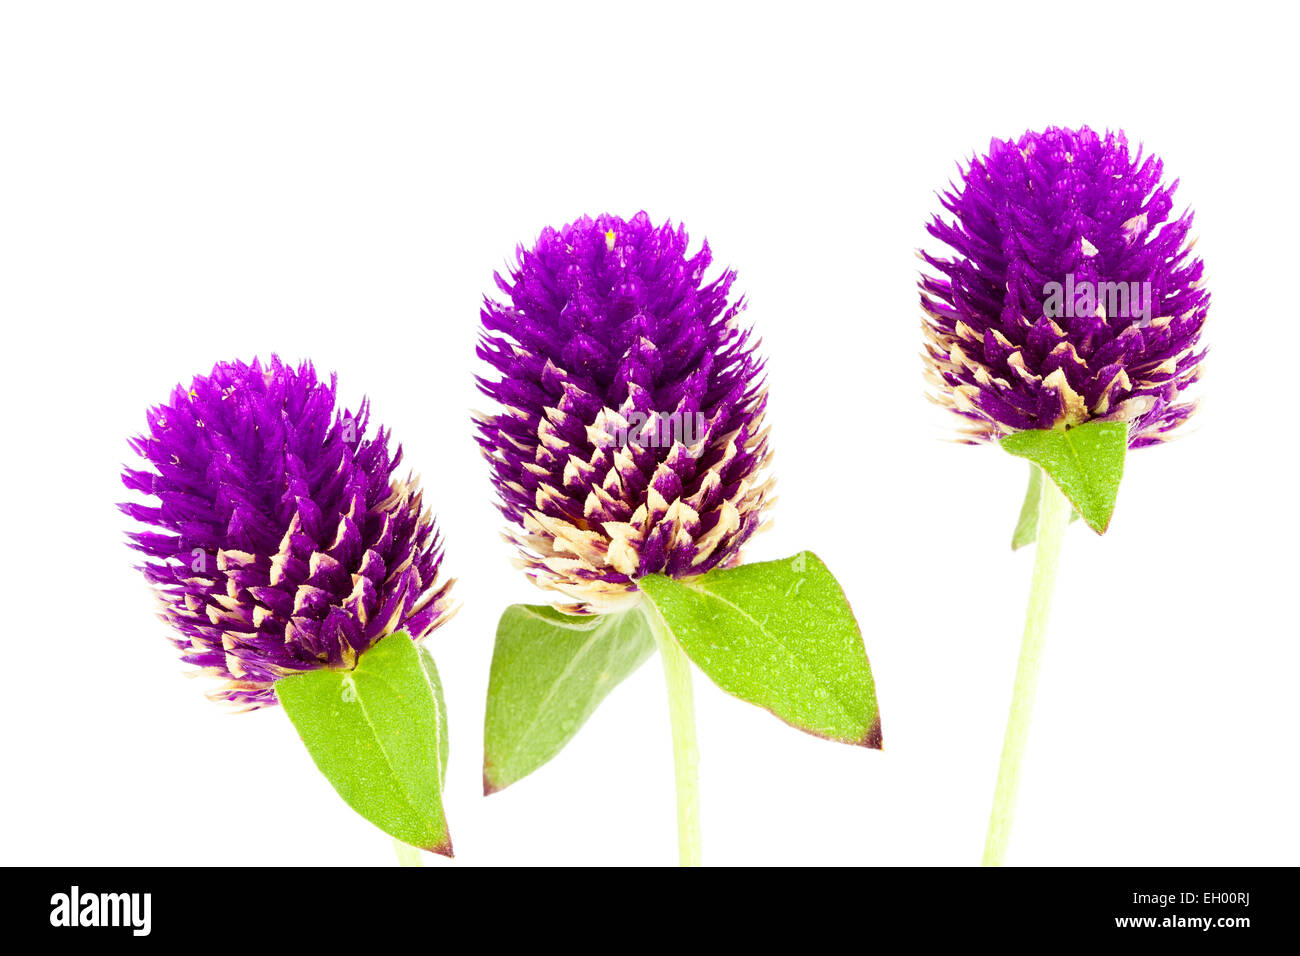 Globe Amaranth or Bachelor Button close up on white background Stock Photo